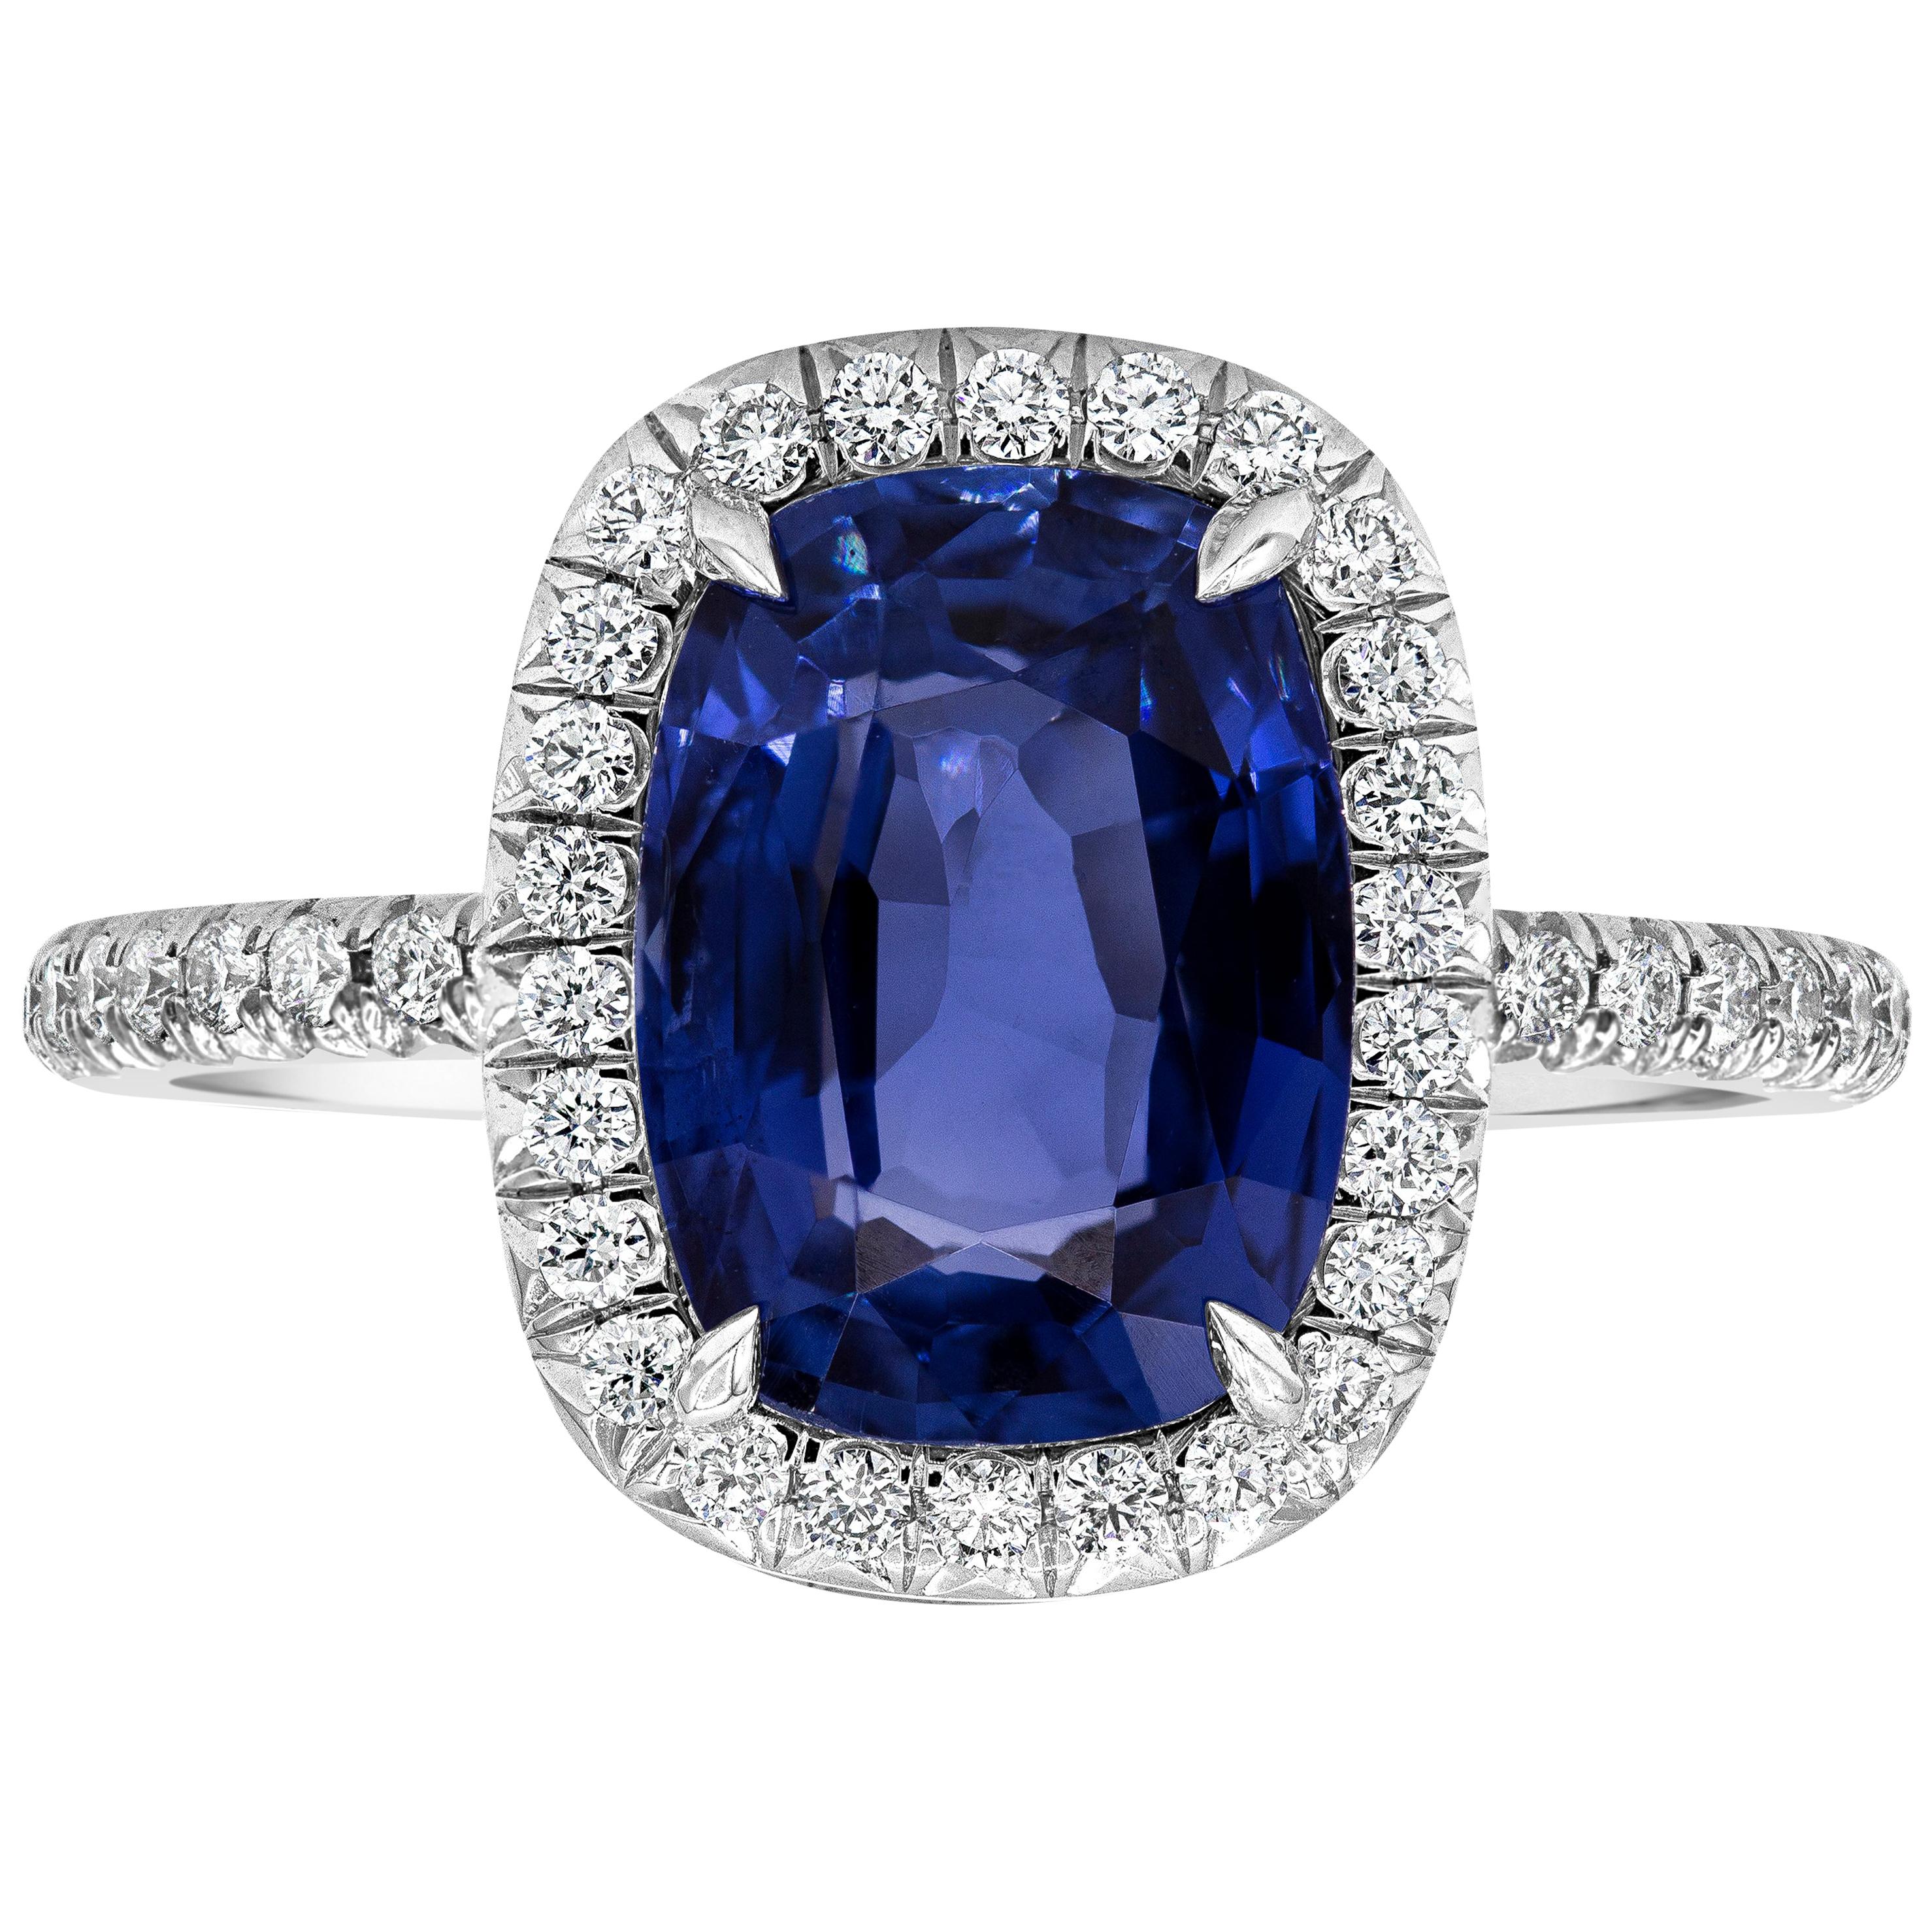 GIA Certified 3.37 Carats Cushion Cut Sapphire with Diamond Halo Engagement Ring